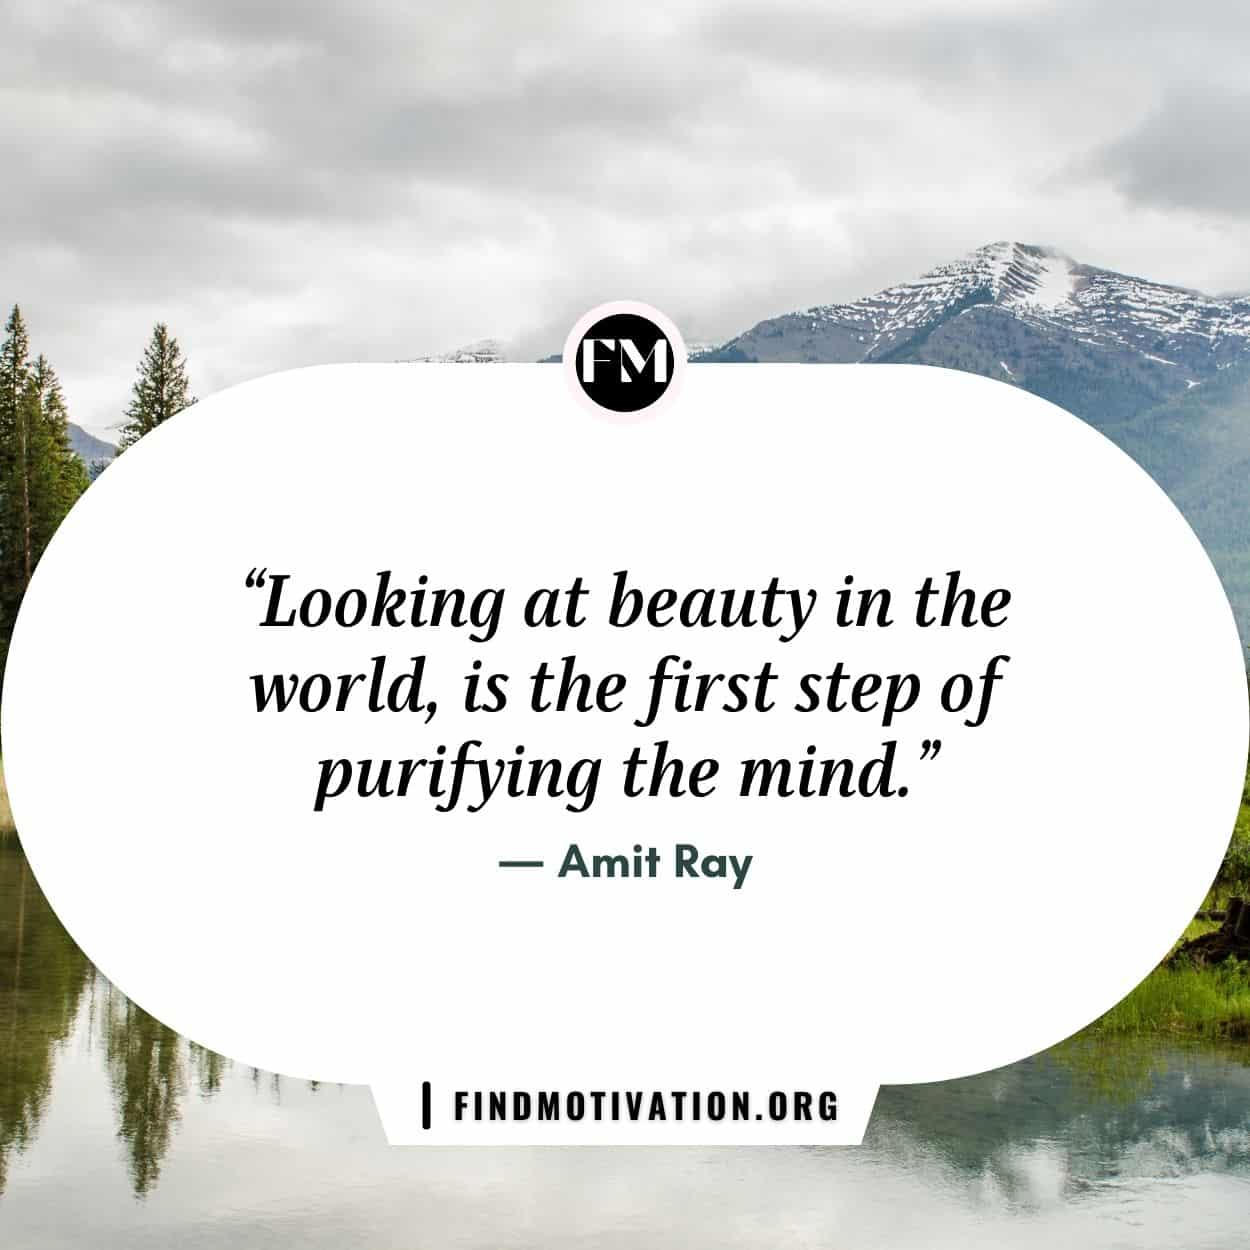 101 motivational quotes & sayings about nature to enjoy the beauty of nature